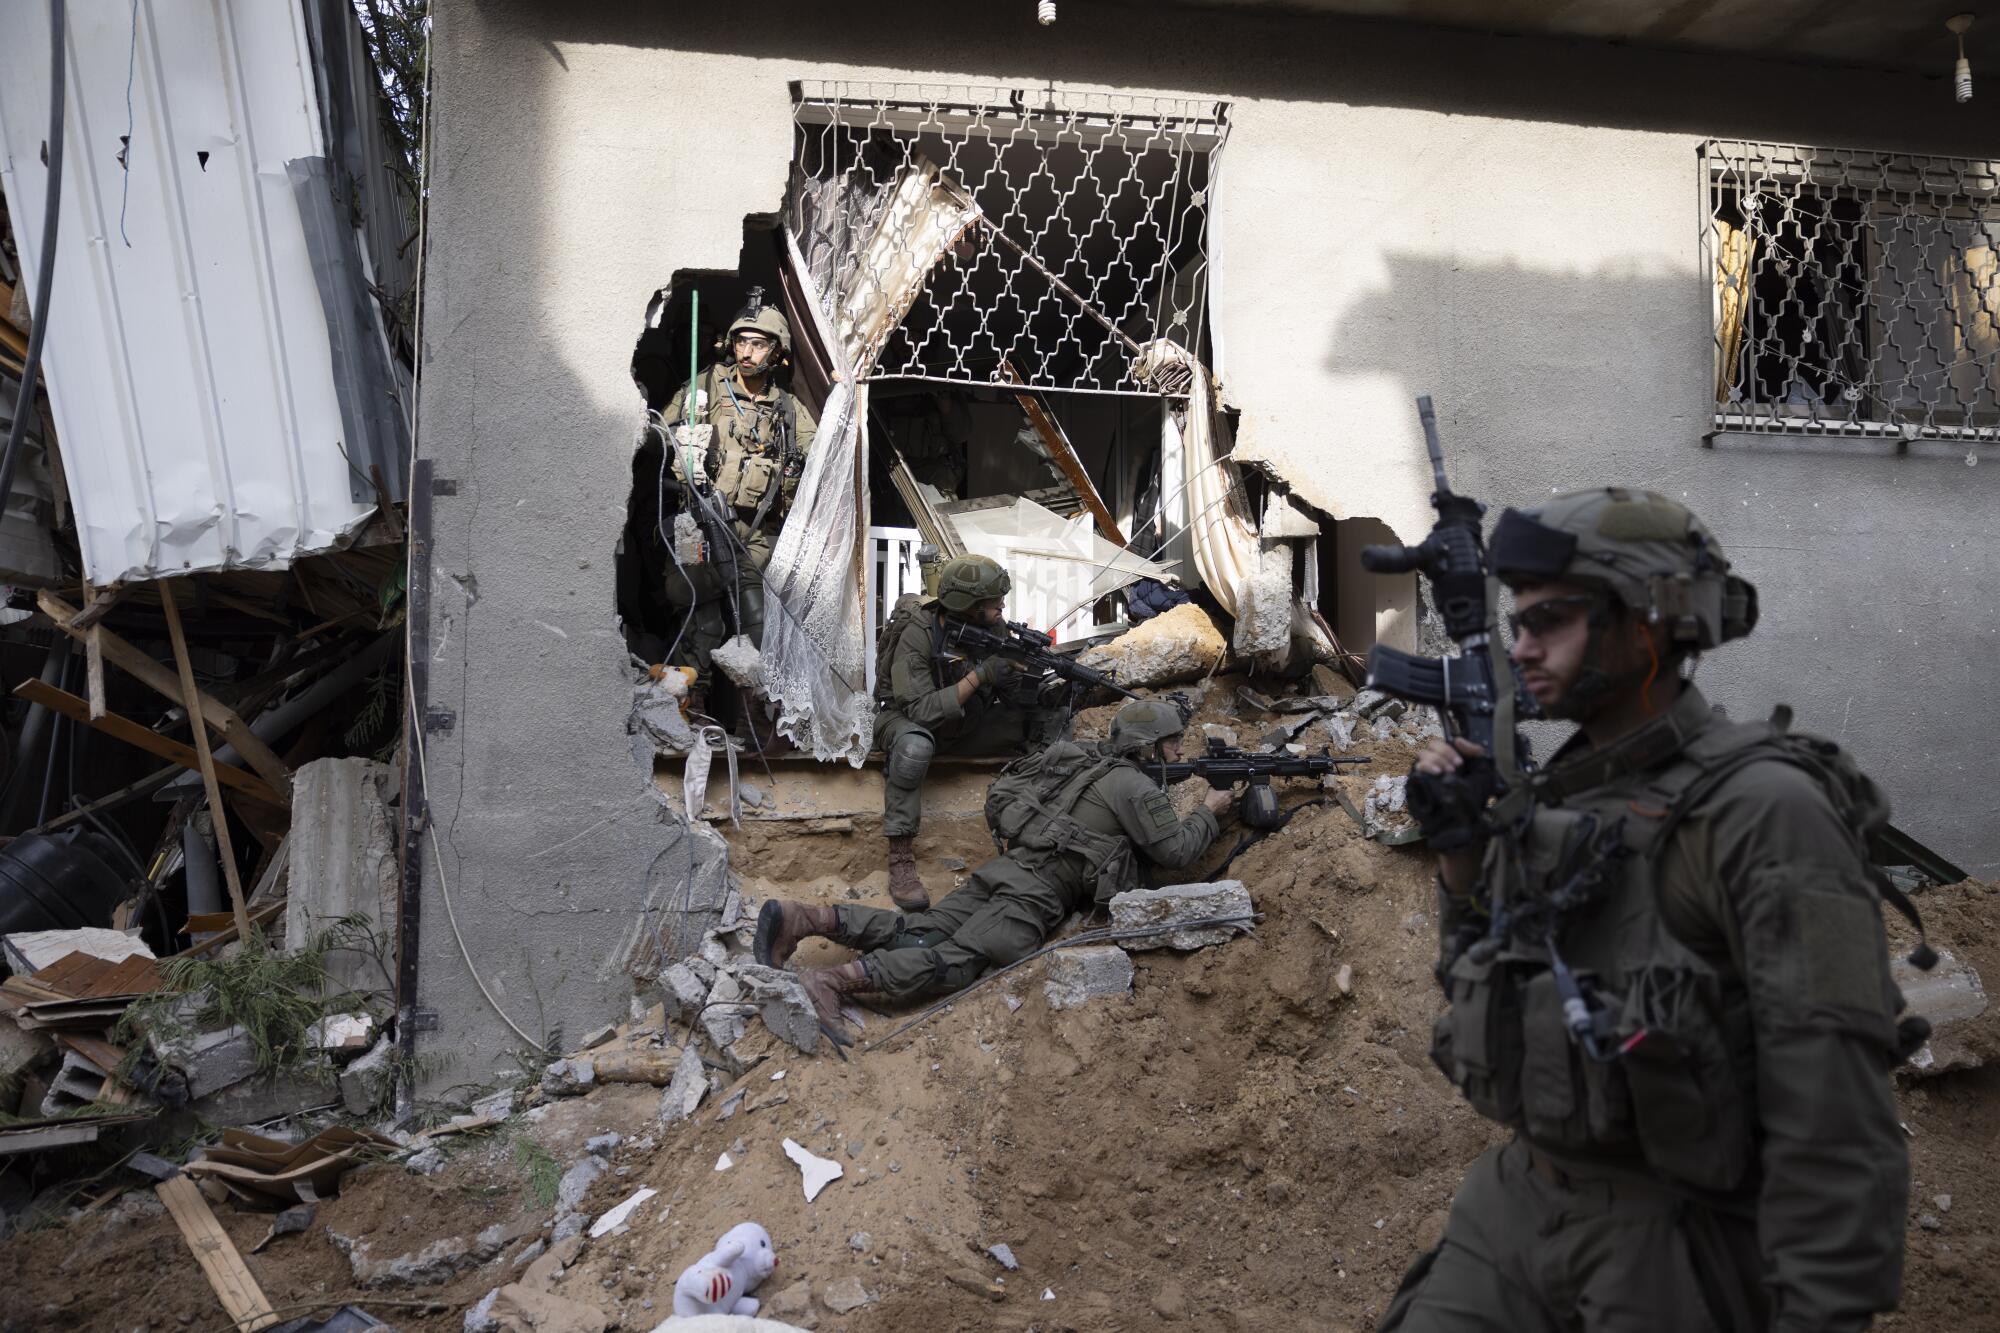 Soldiers take position in a wrecked building, with a large hole punched into a wall